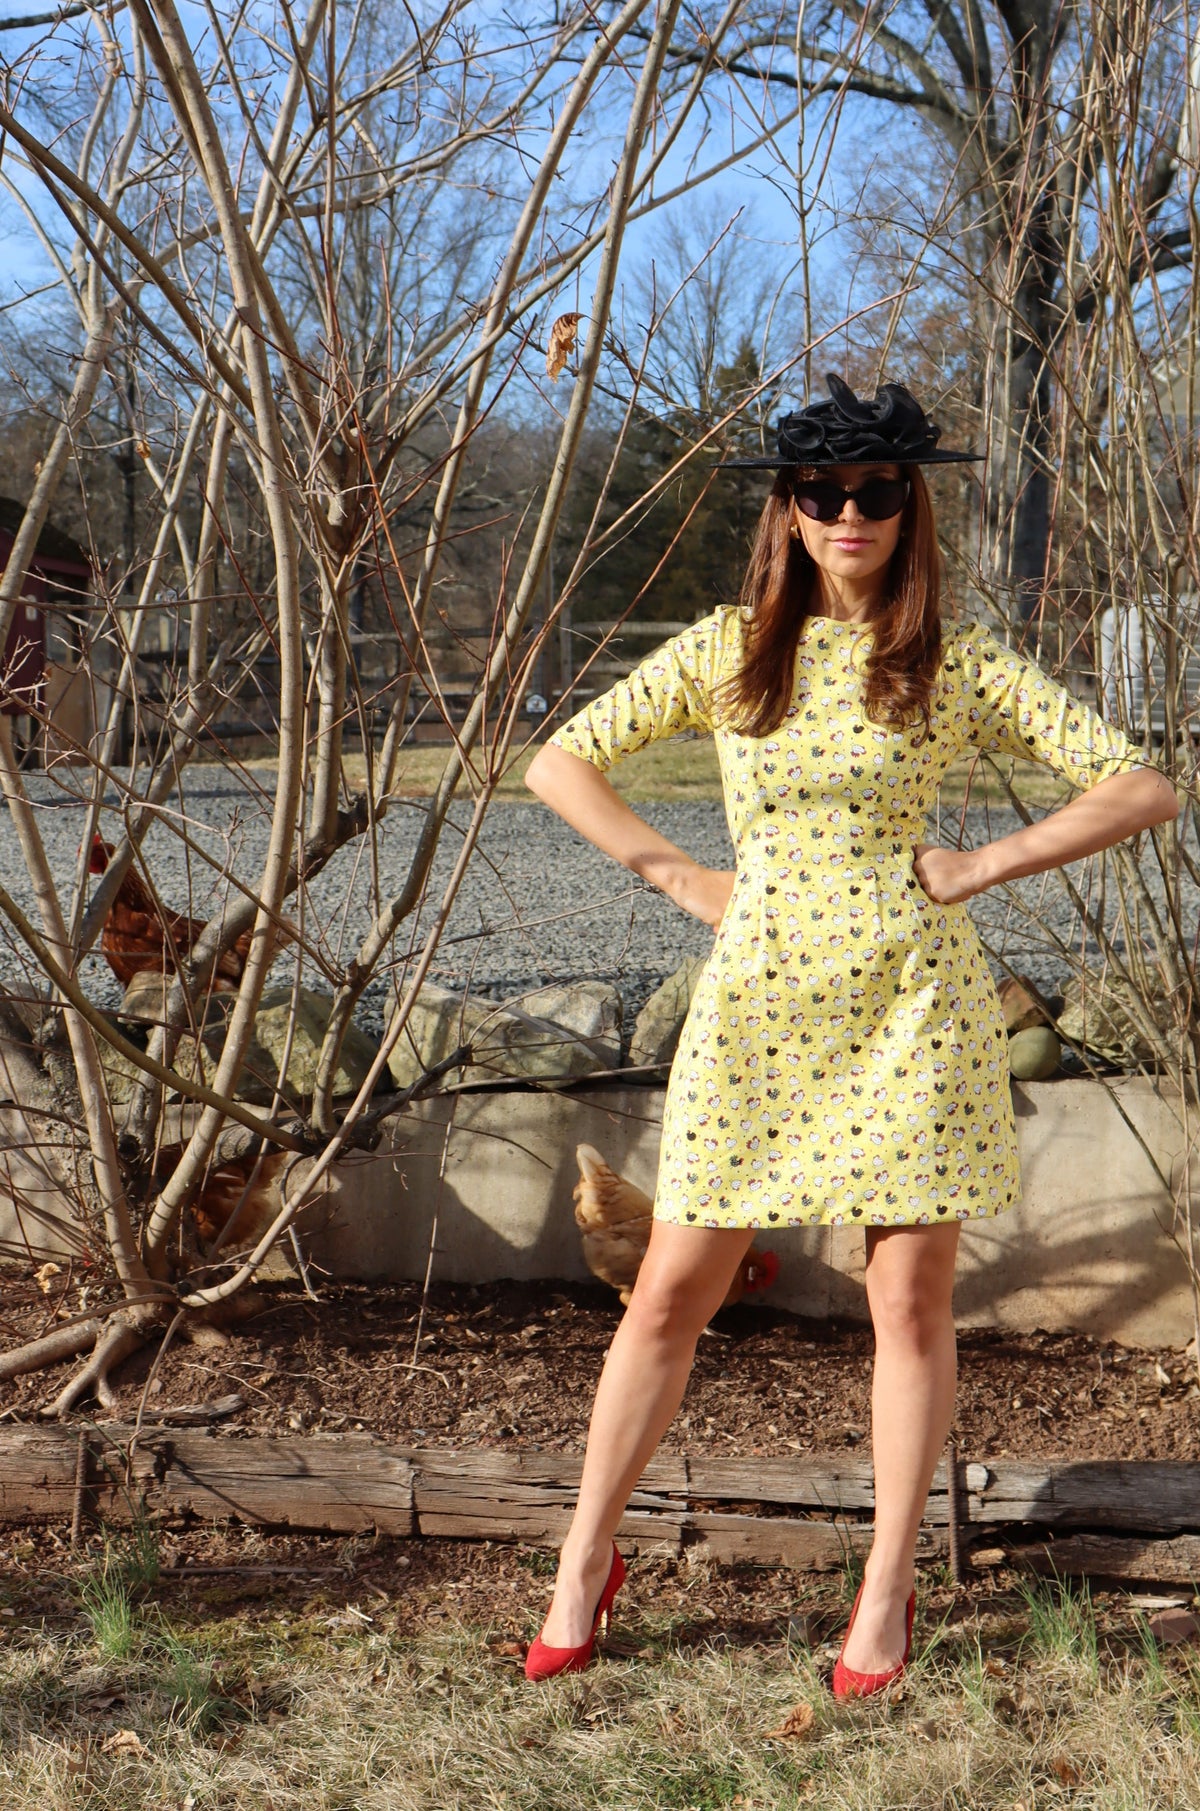 Model with hands on hips, wearing a black hat and wearing Editorial Chicken Dress,  a cute chicken print classic shift dress.